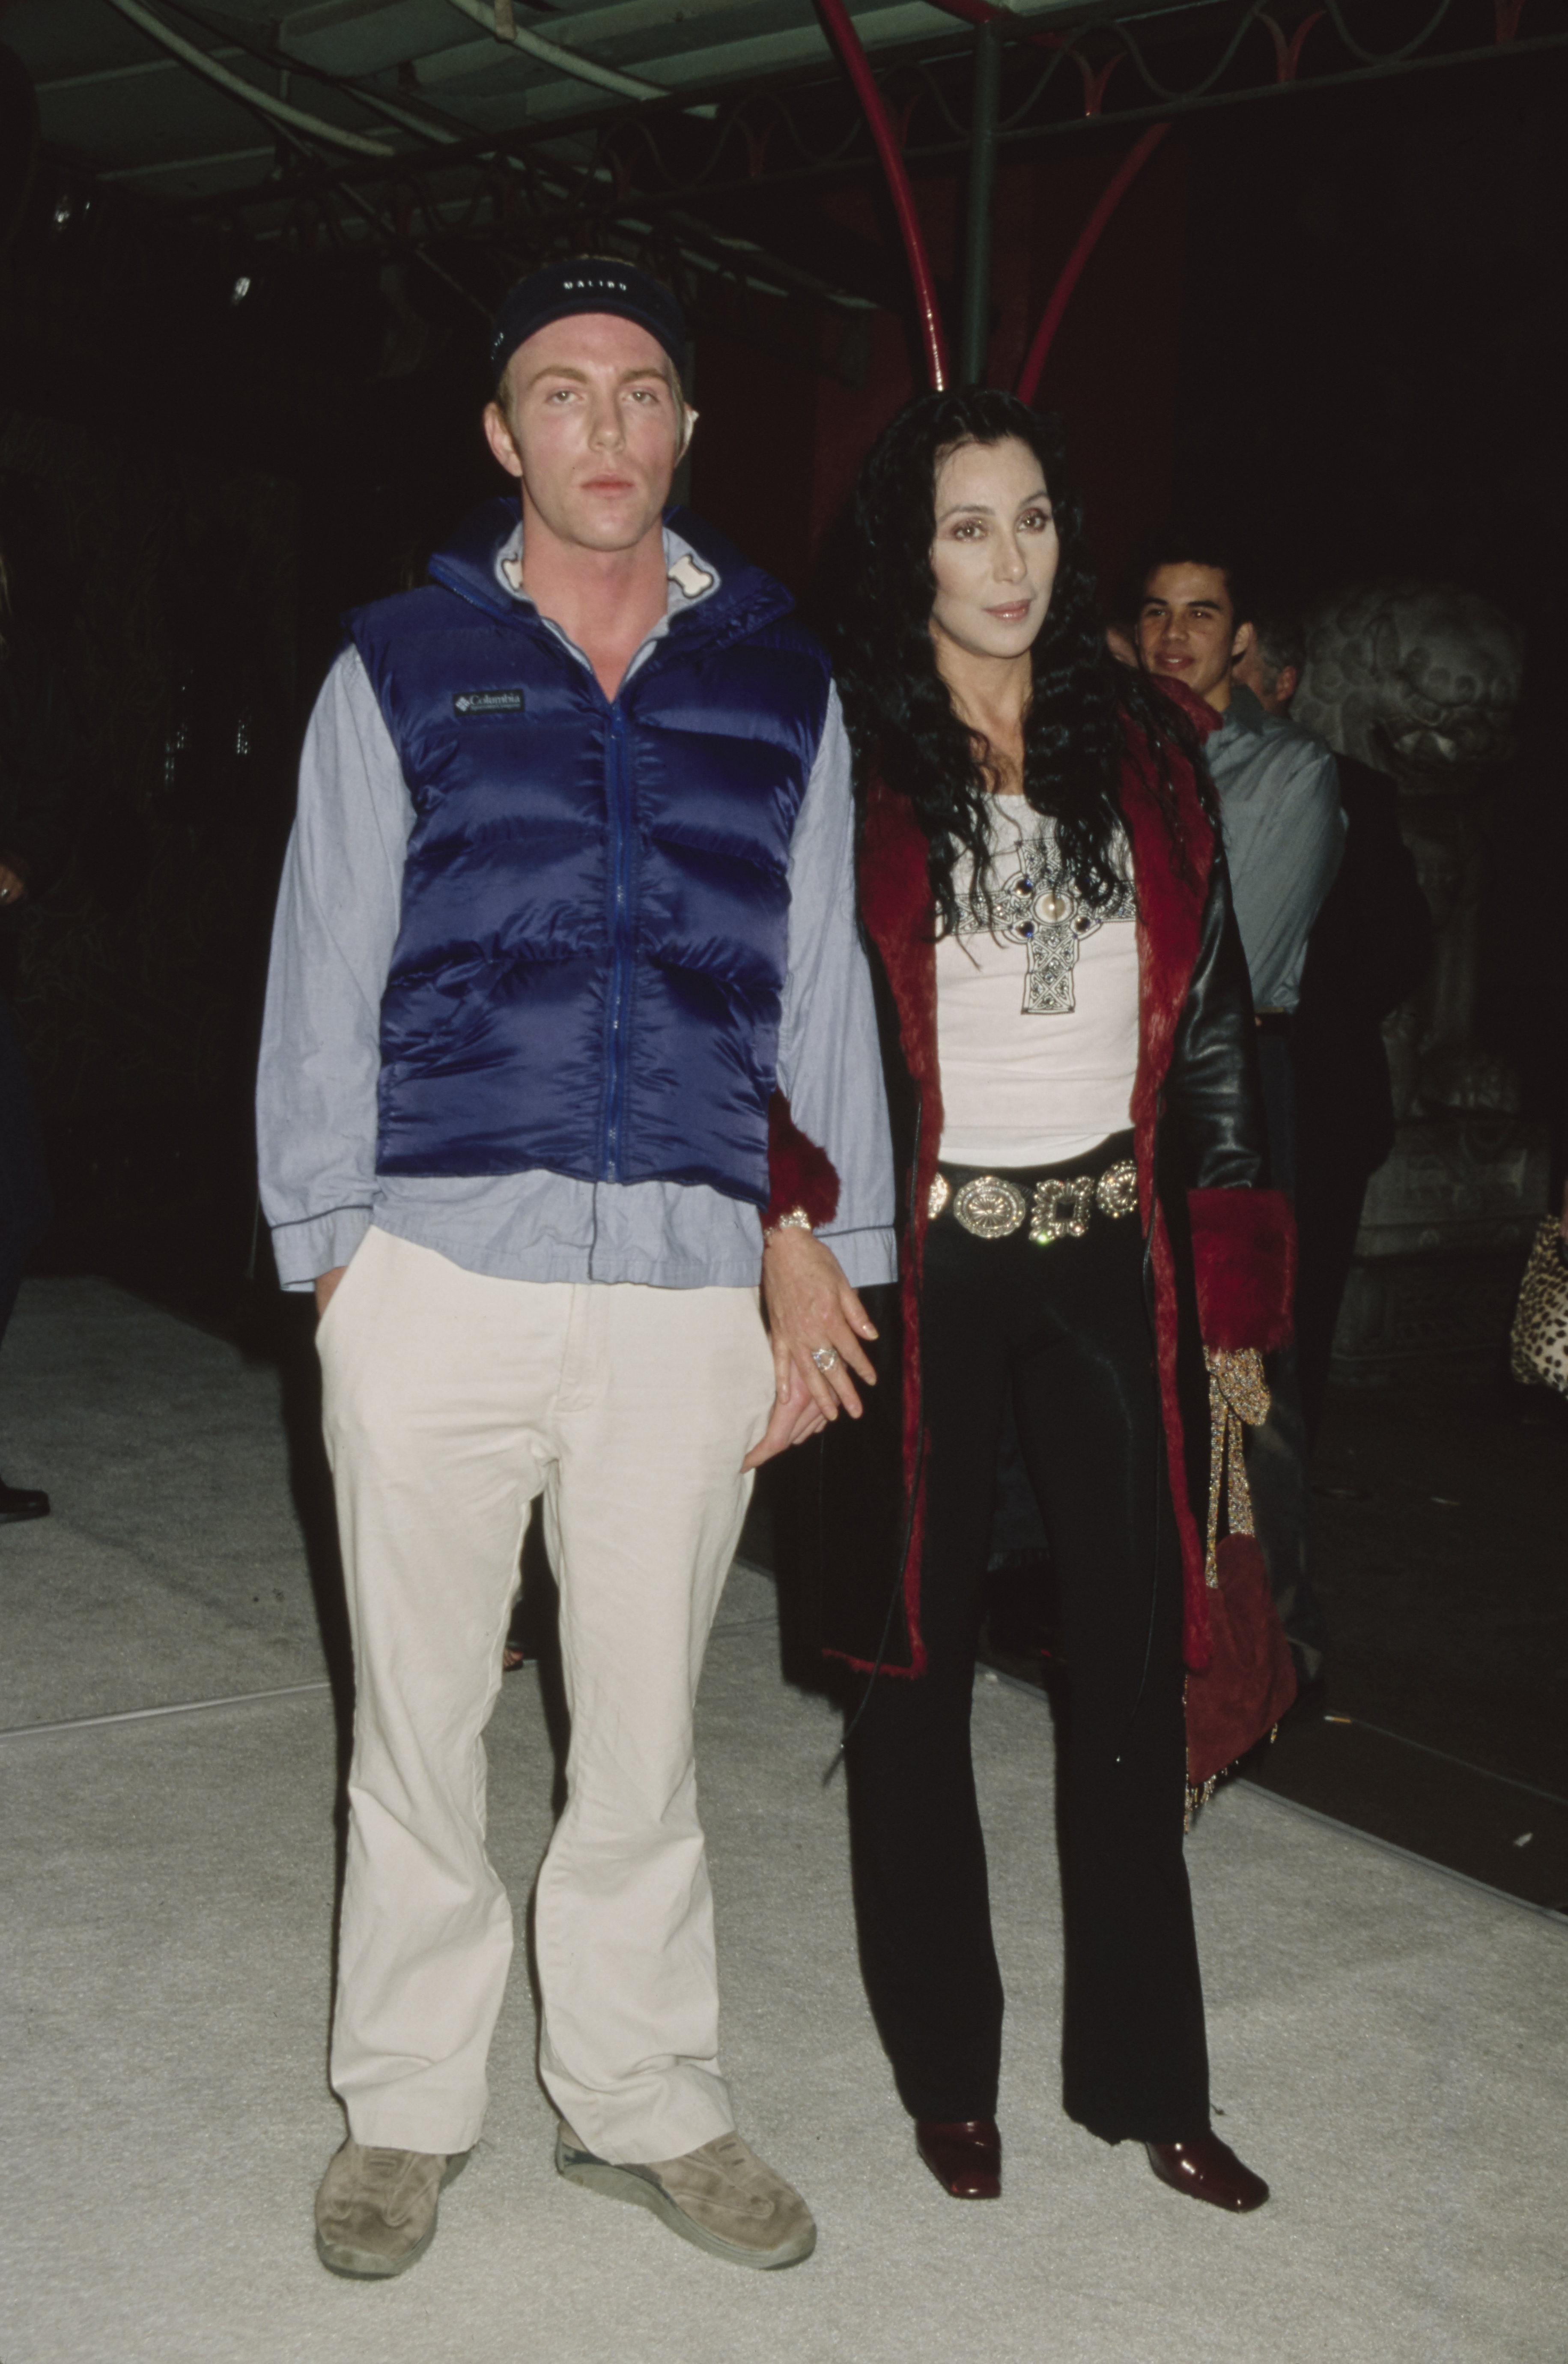 Elijah Blue Allman and Cher at the premiere of "Blow" in Westwood, California on March 29, 2001 | Source: Getty Images